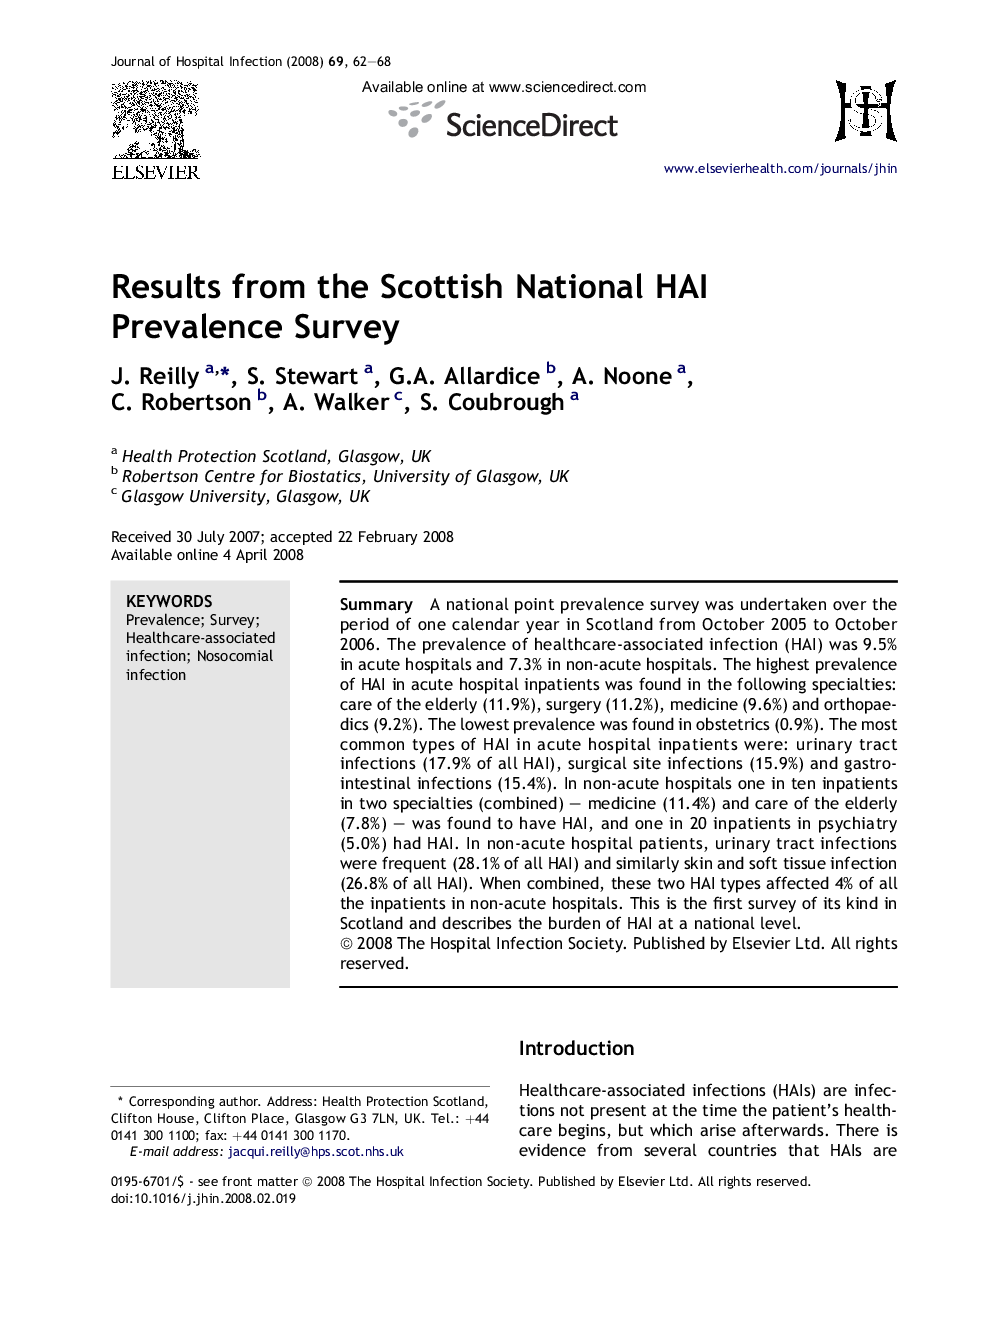 Results from the Scottish National HAI Prevalence Survey